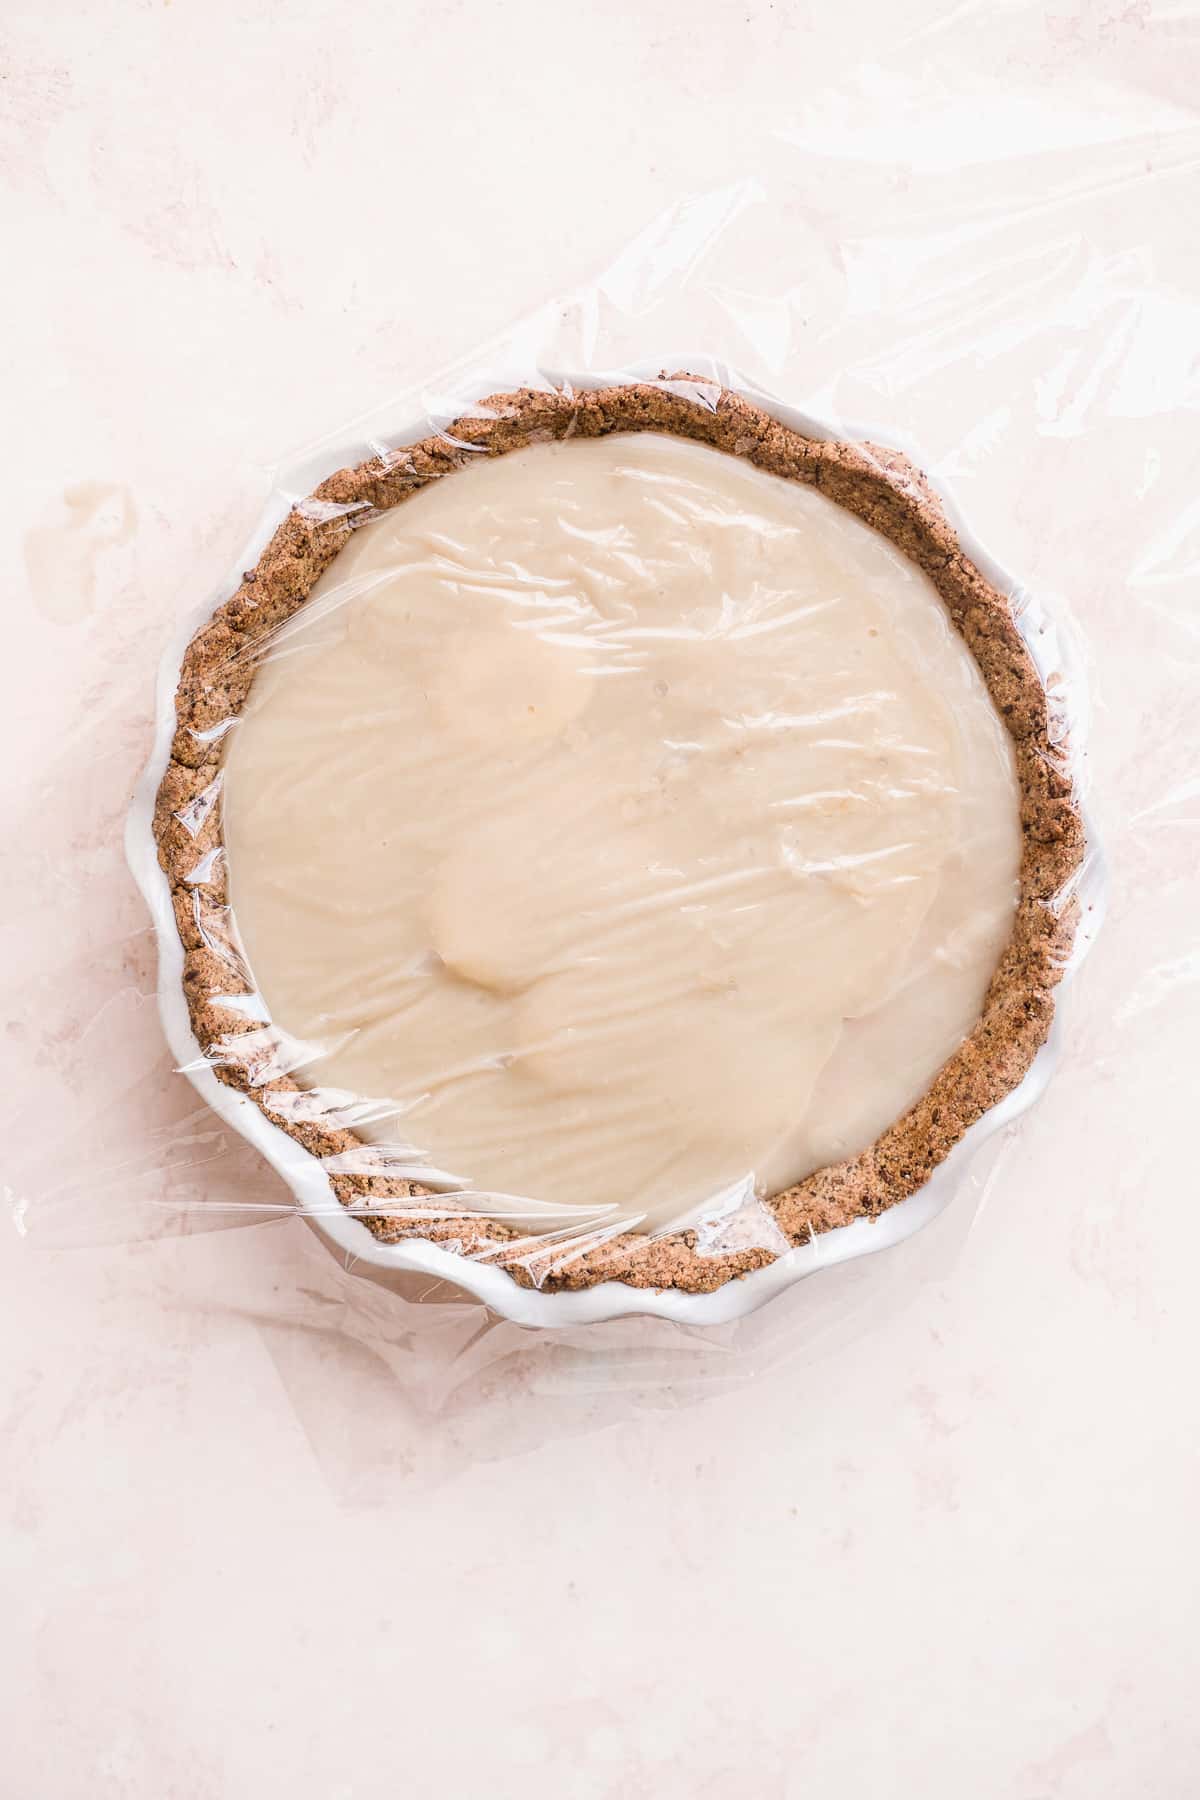 Image of pie on a pink surface with cling wrap over top of pie.